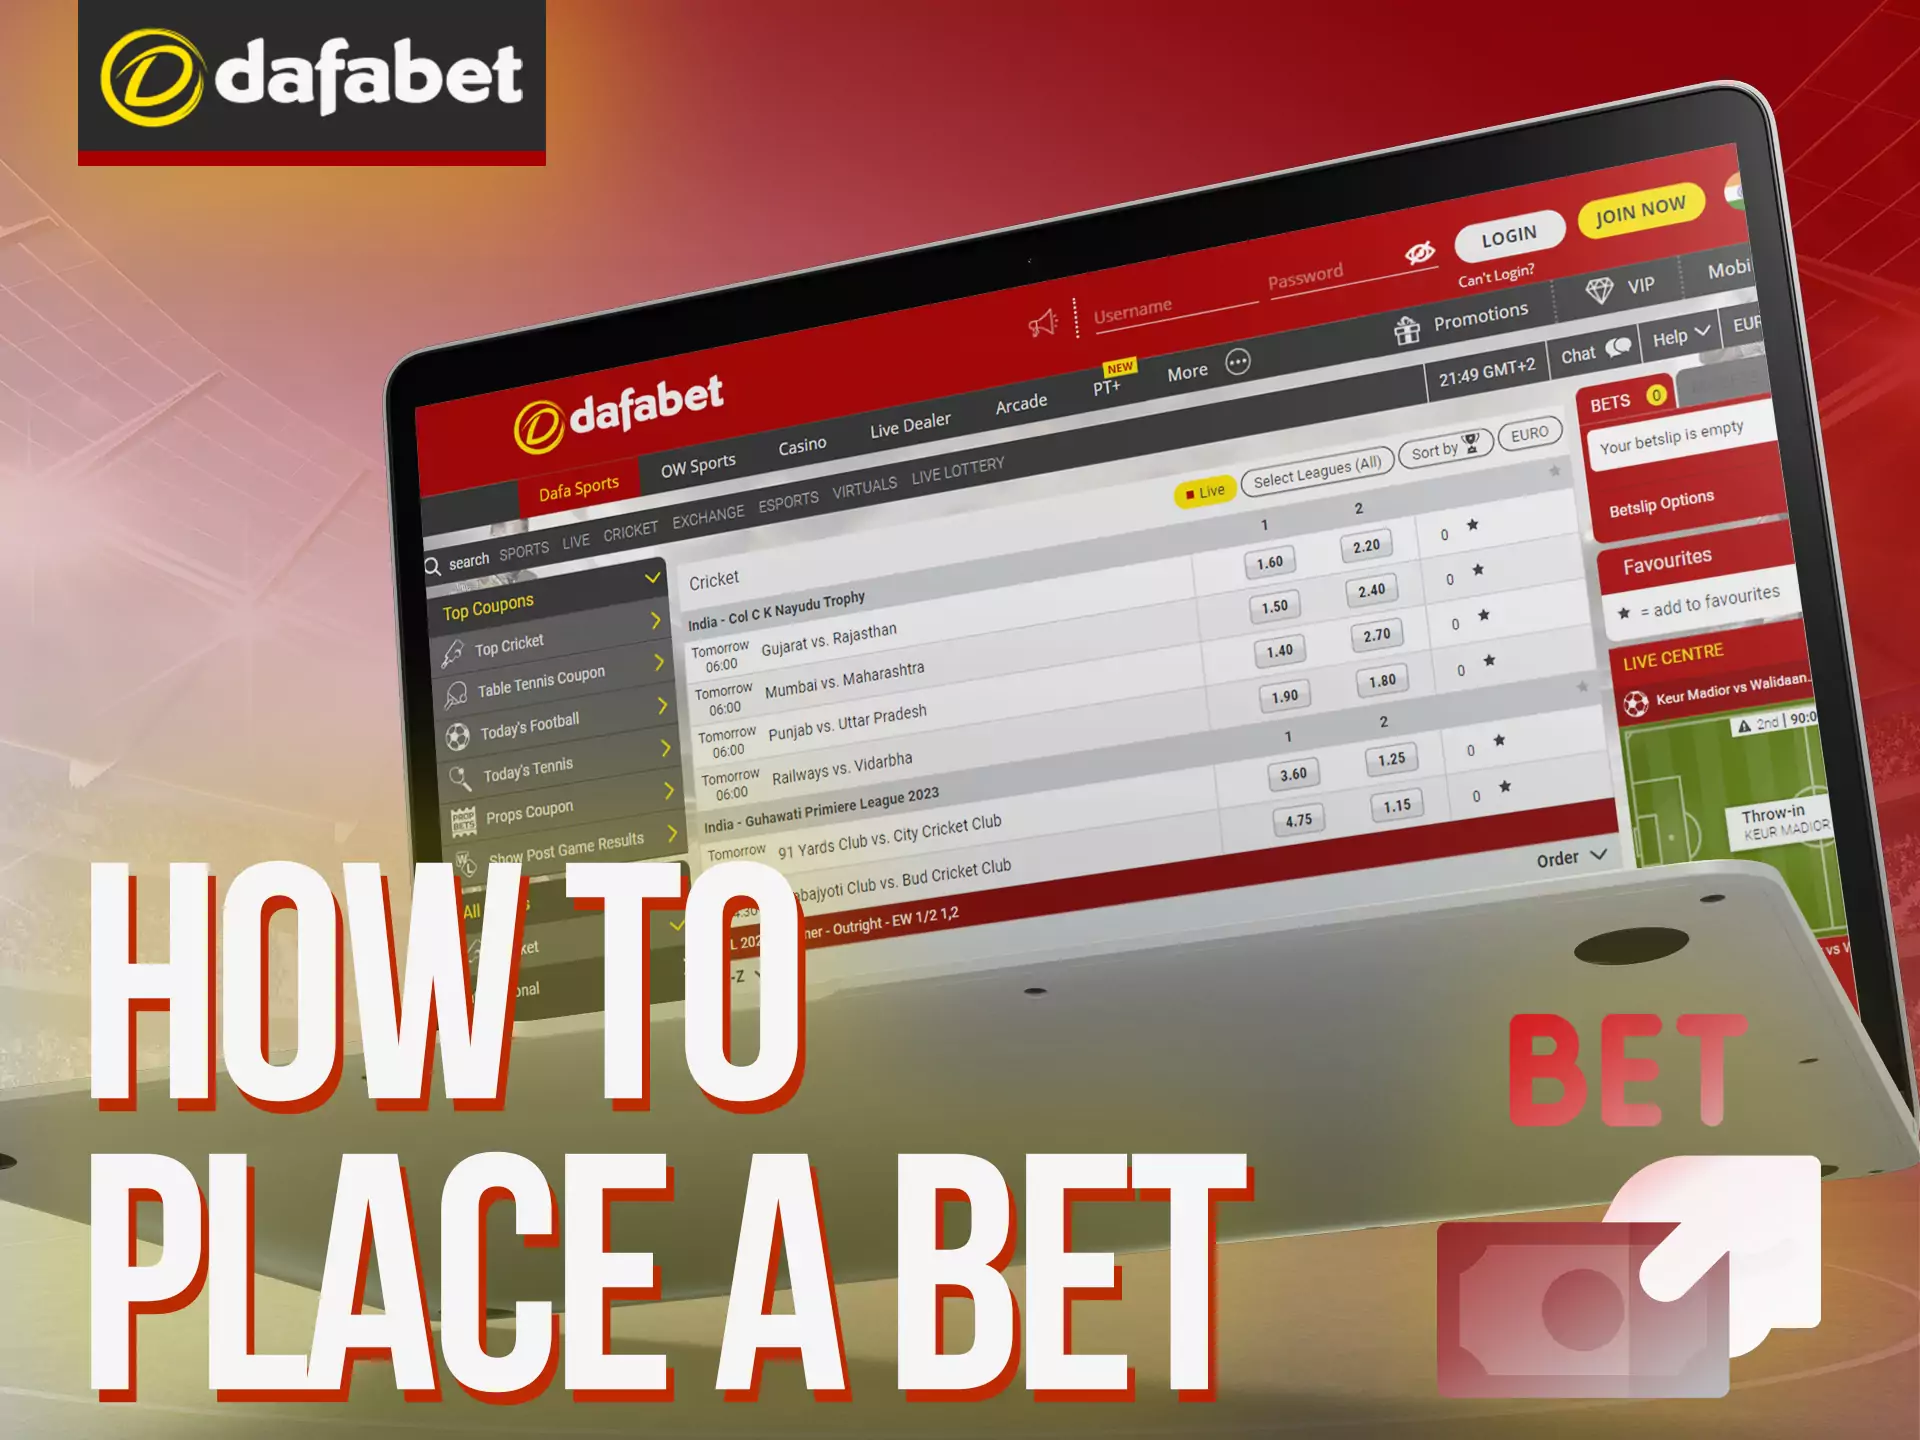 With these simple instructions, learn how easy it is to bet on Dafabet.